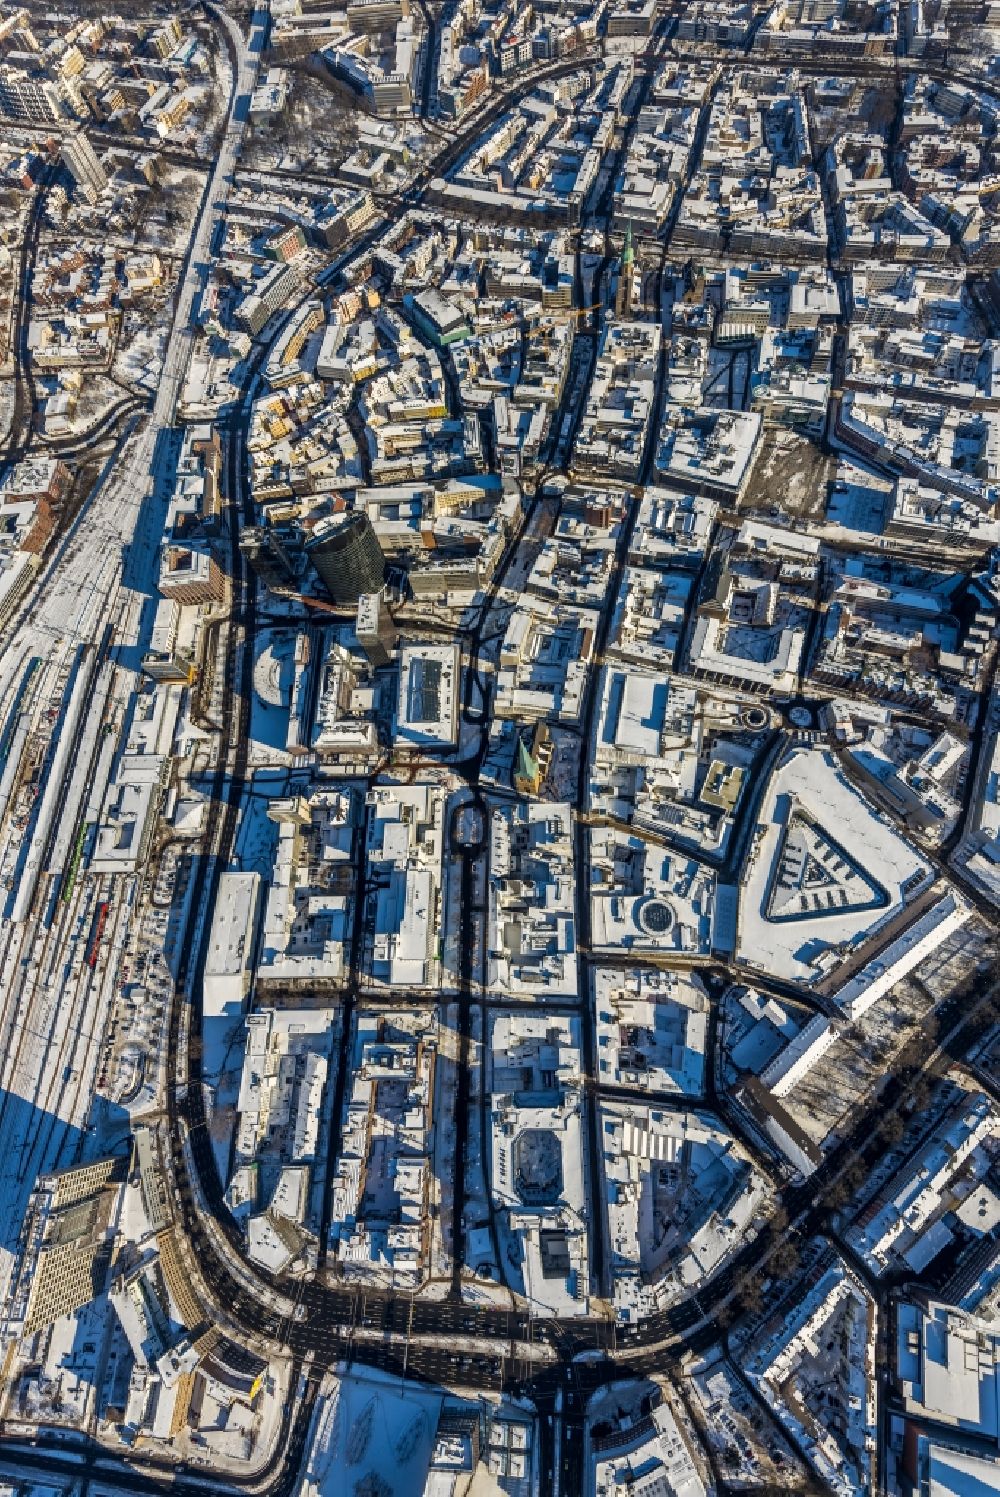 Dortmund from the bird's eye view: Wintry snowy the city center in the downtown area in Dortmund in the state North Rhine-Westphalia, Germany